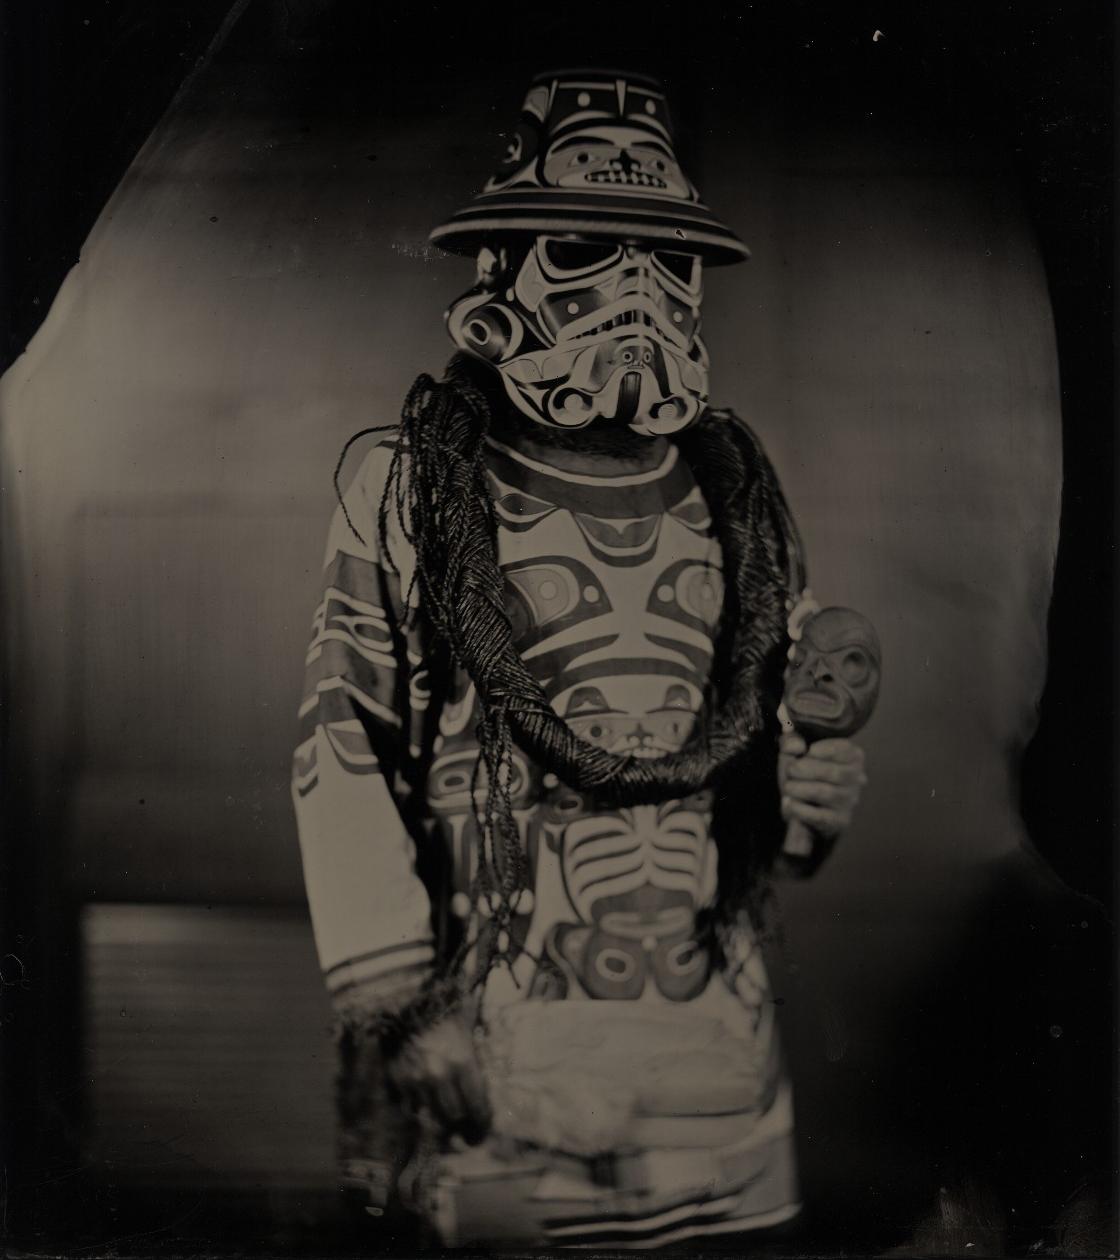 Will Wilson, Diné, b. 1969, "K’ómoks Imperial Stormtrooper (Andy Everson), Citizen of the K’ómoks First Nation," 2018